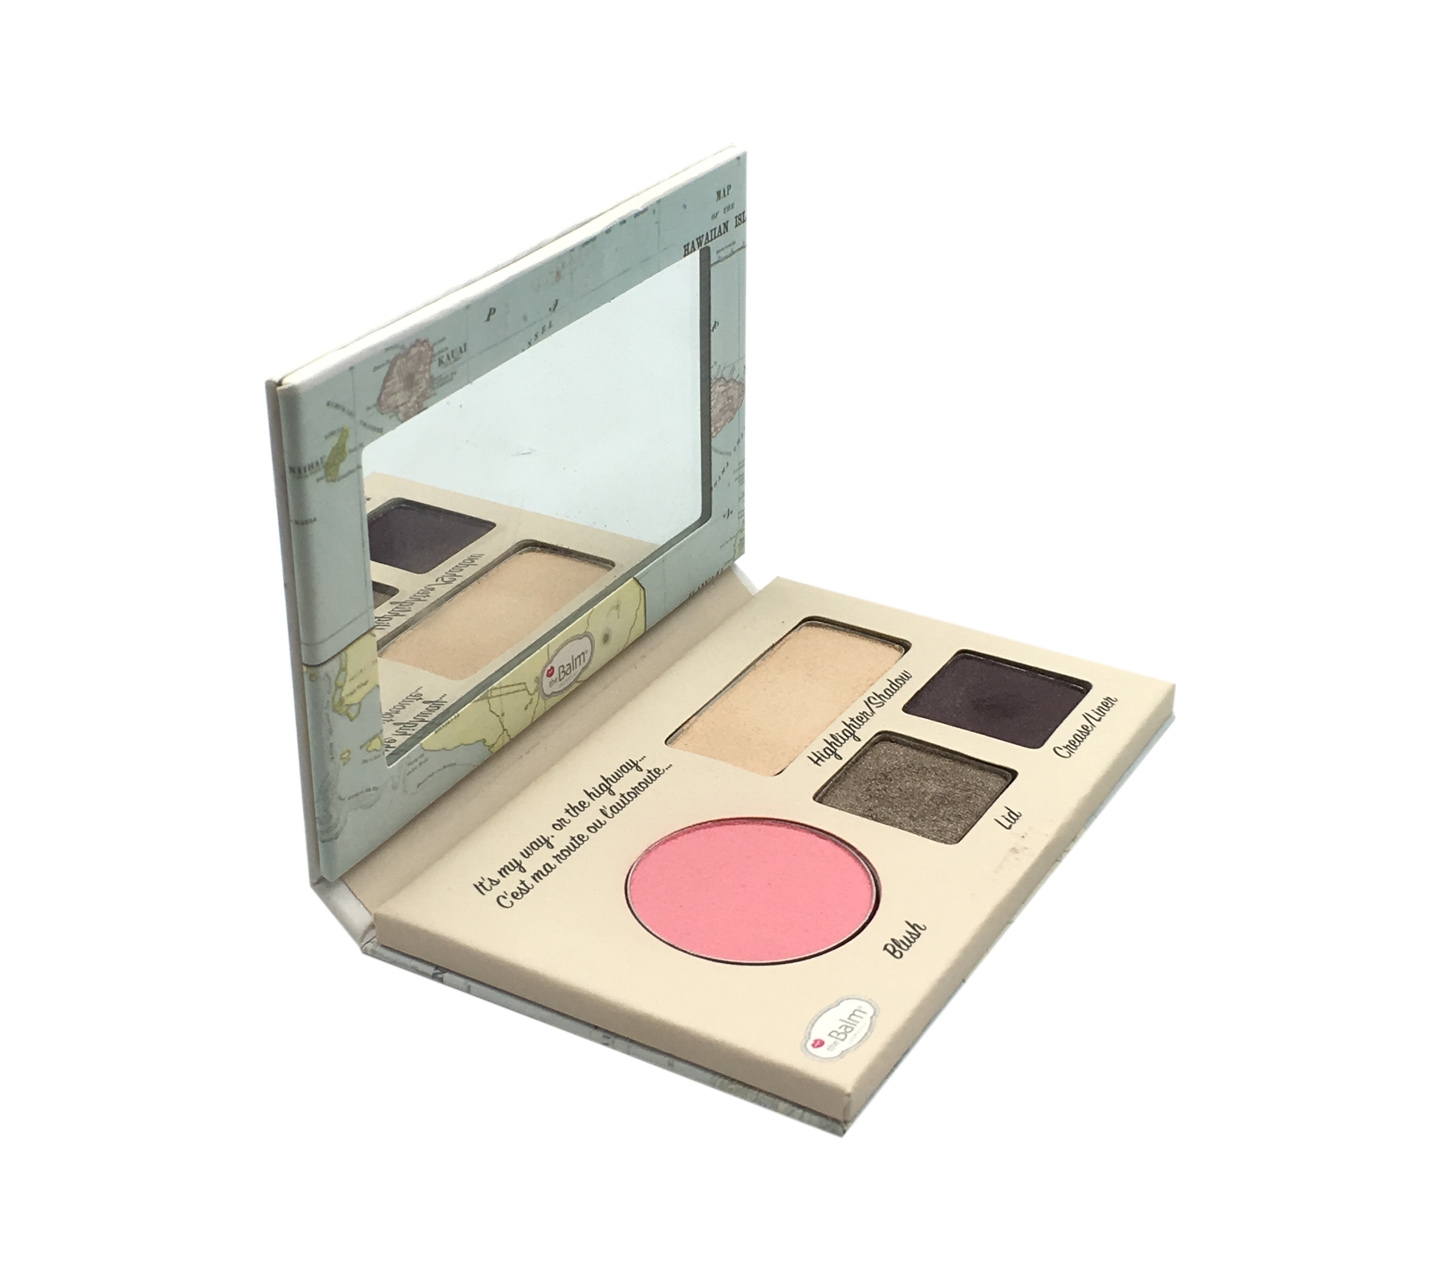 The Balm Hawaii Driver License Face Palette